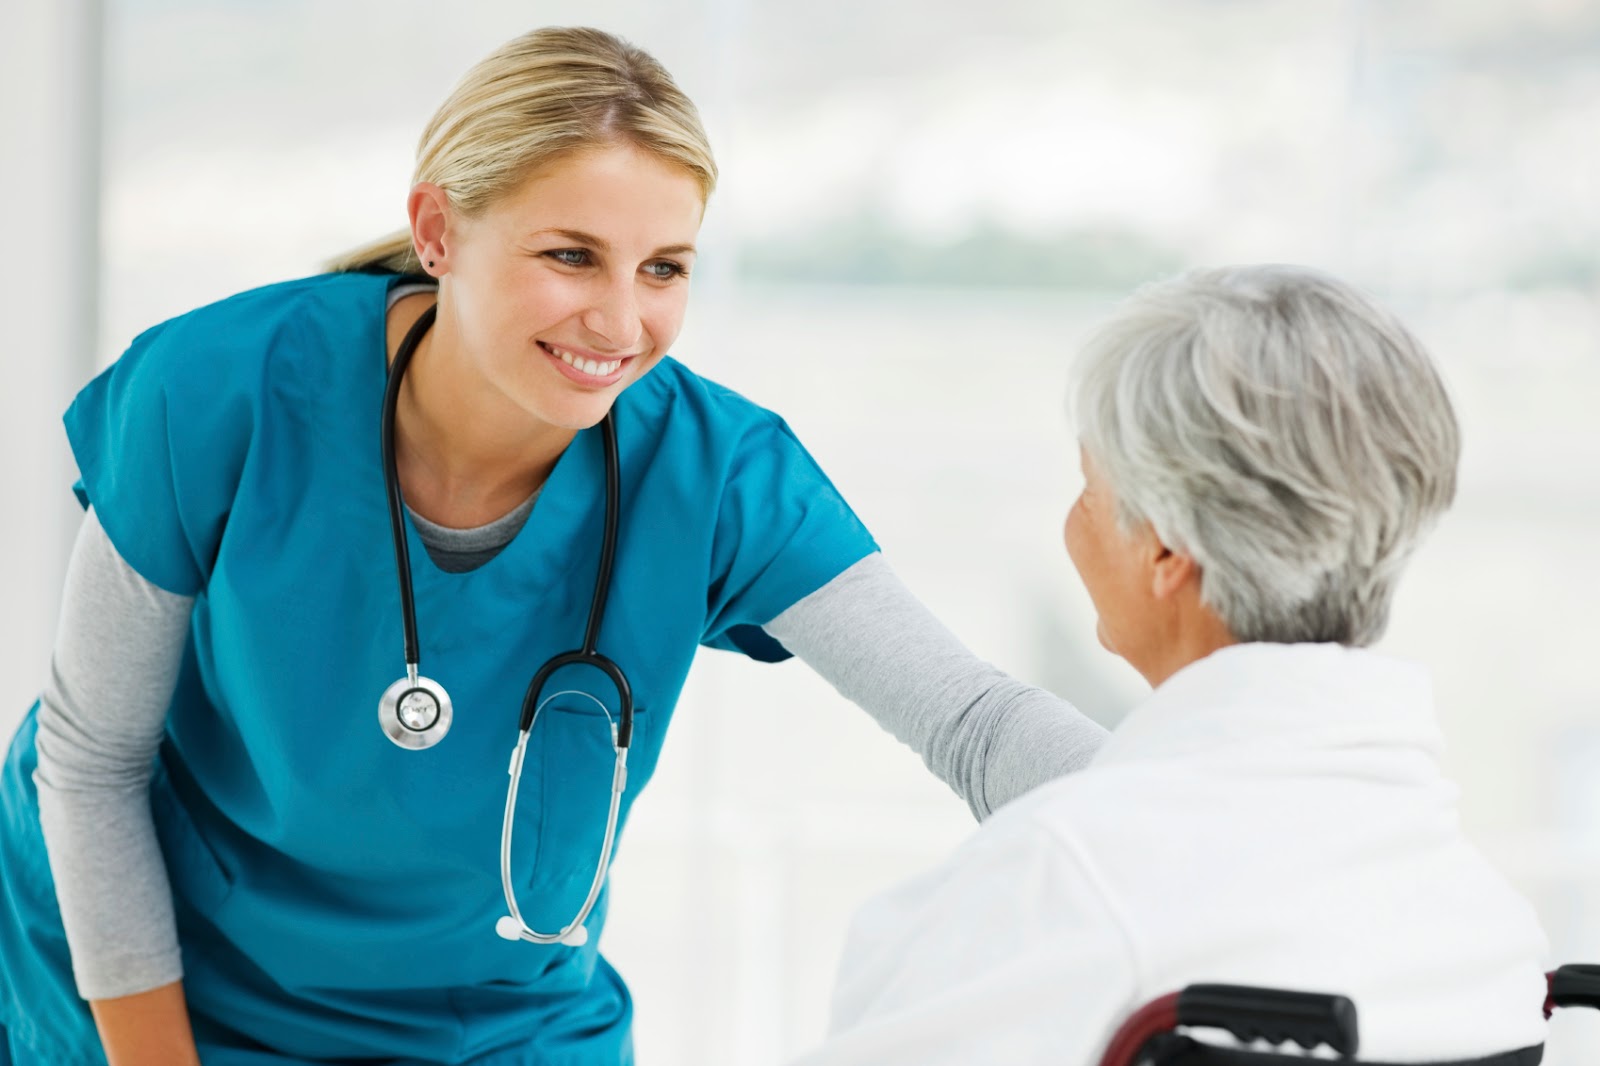 what-should-a-medical-assistant-keep-in-mind-while-noting-patient-histories-medical-career